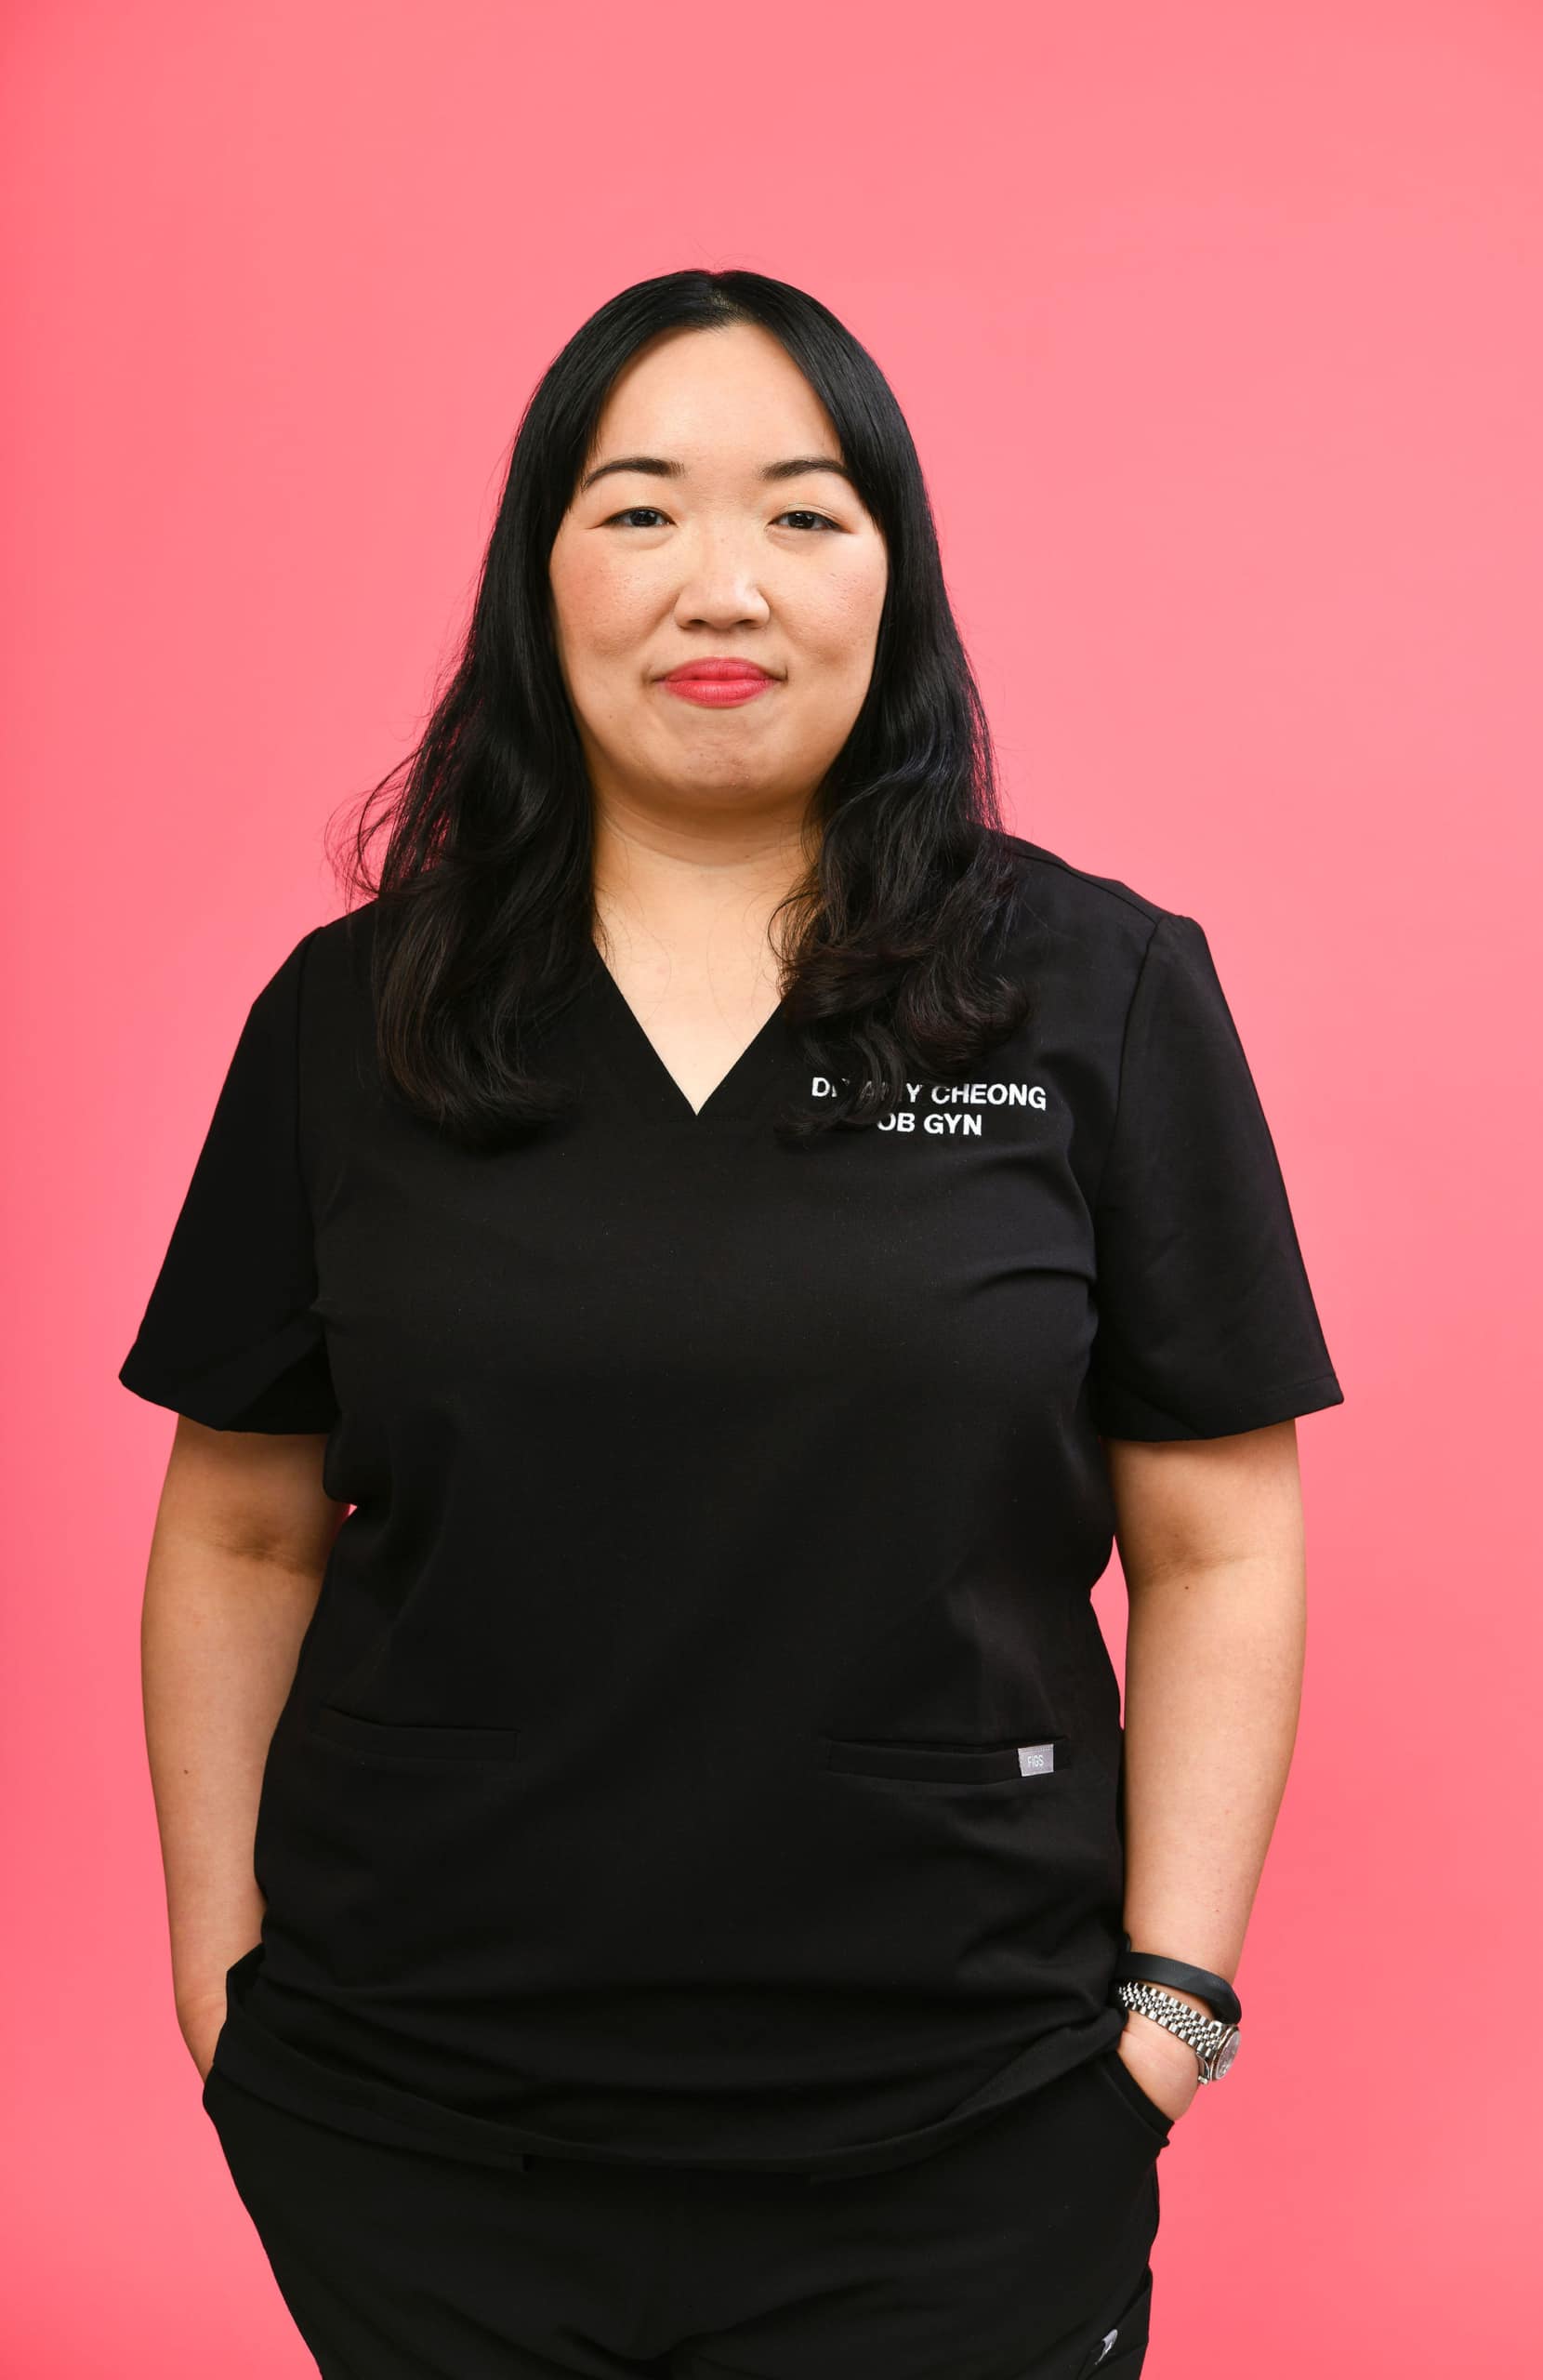 Member in scrubs on a pink background